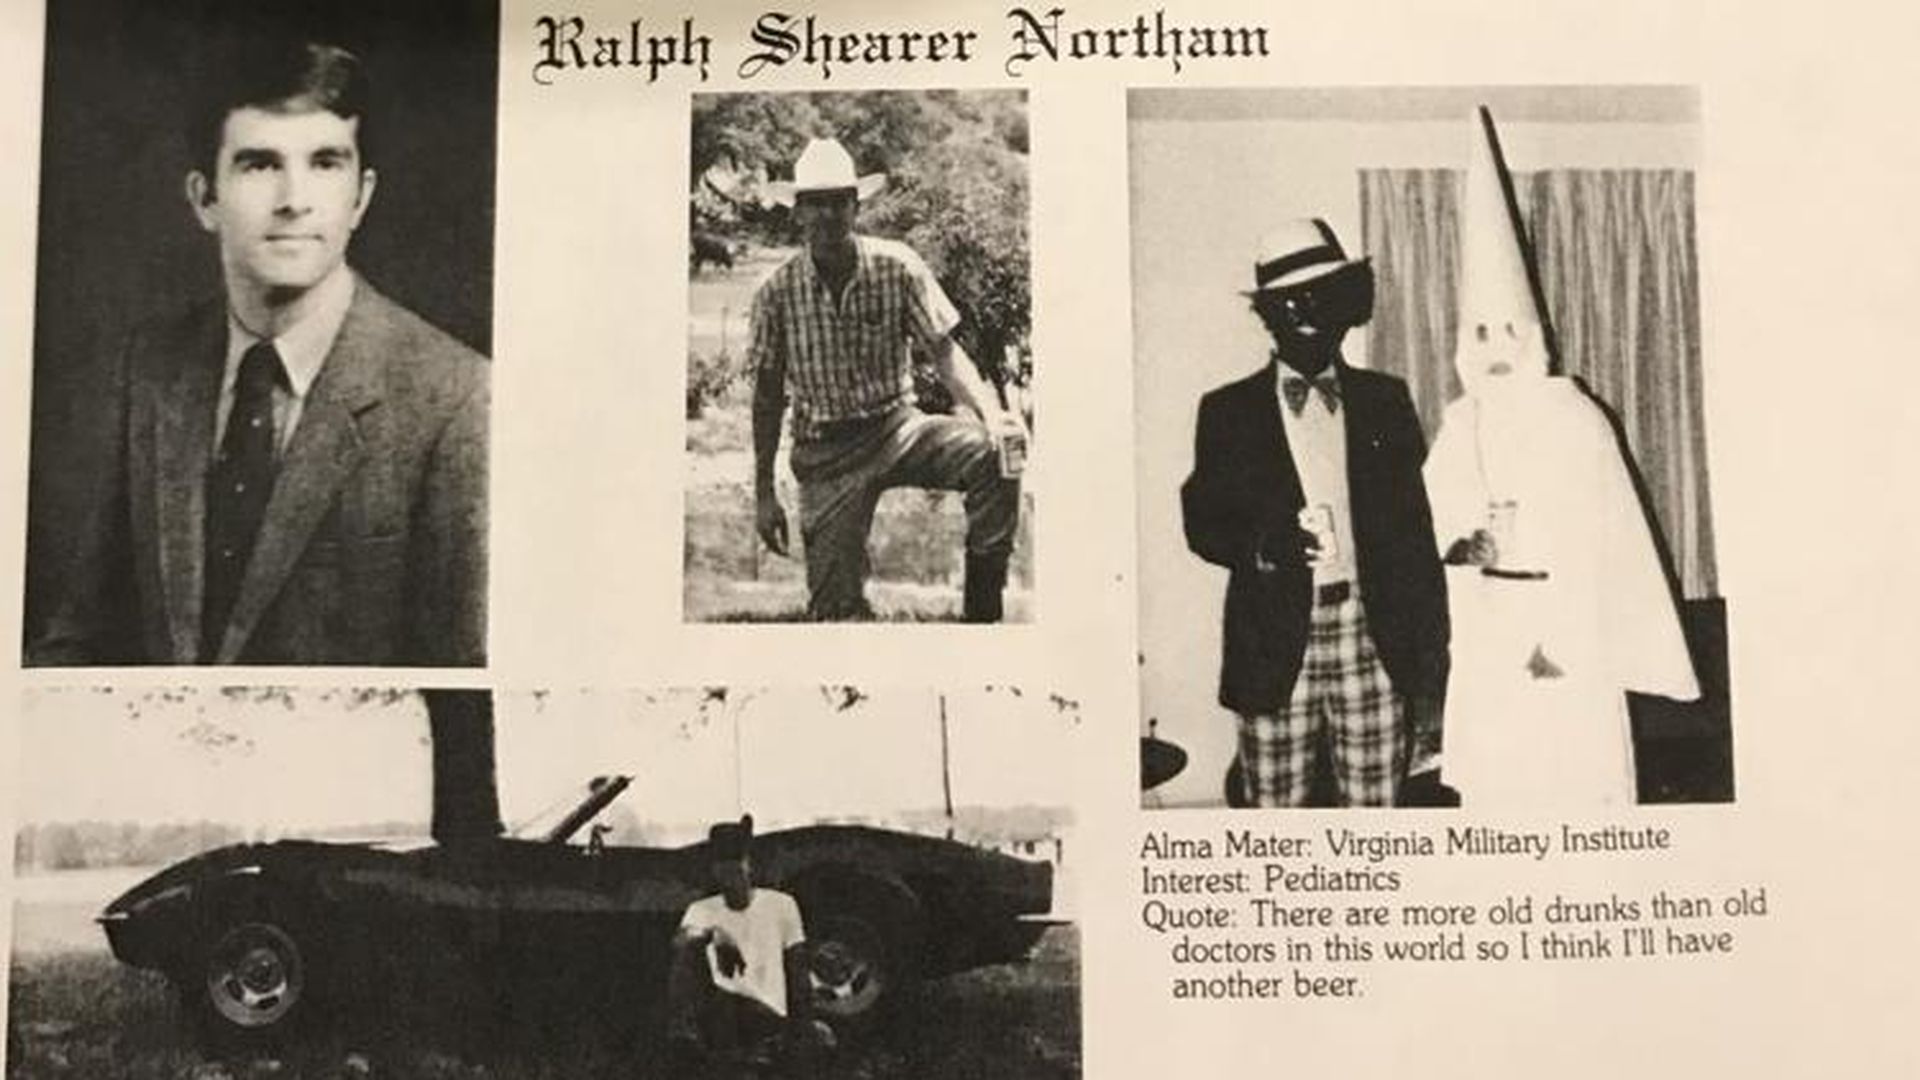 Virginia Gov. Ralph Northam apologizes for racist yearbook photo - Axios1920 x 1080